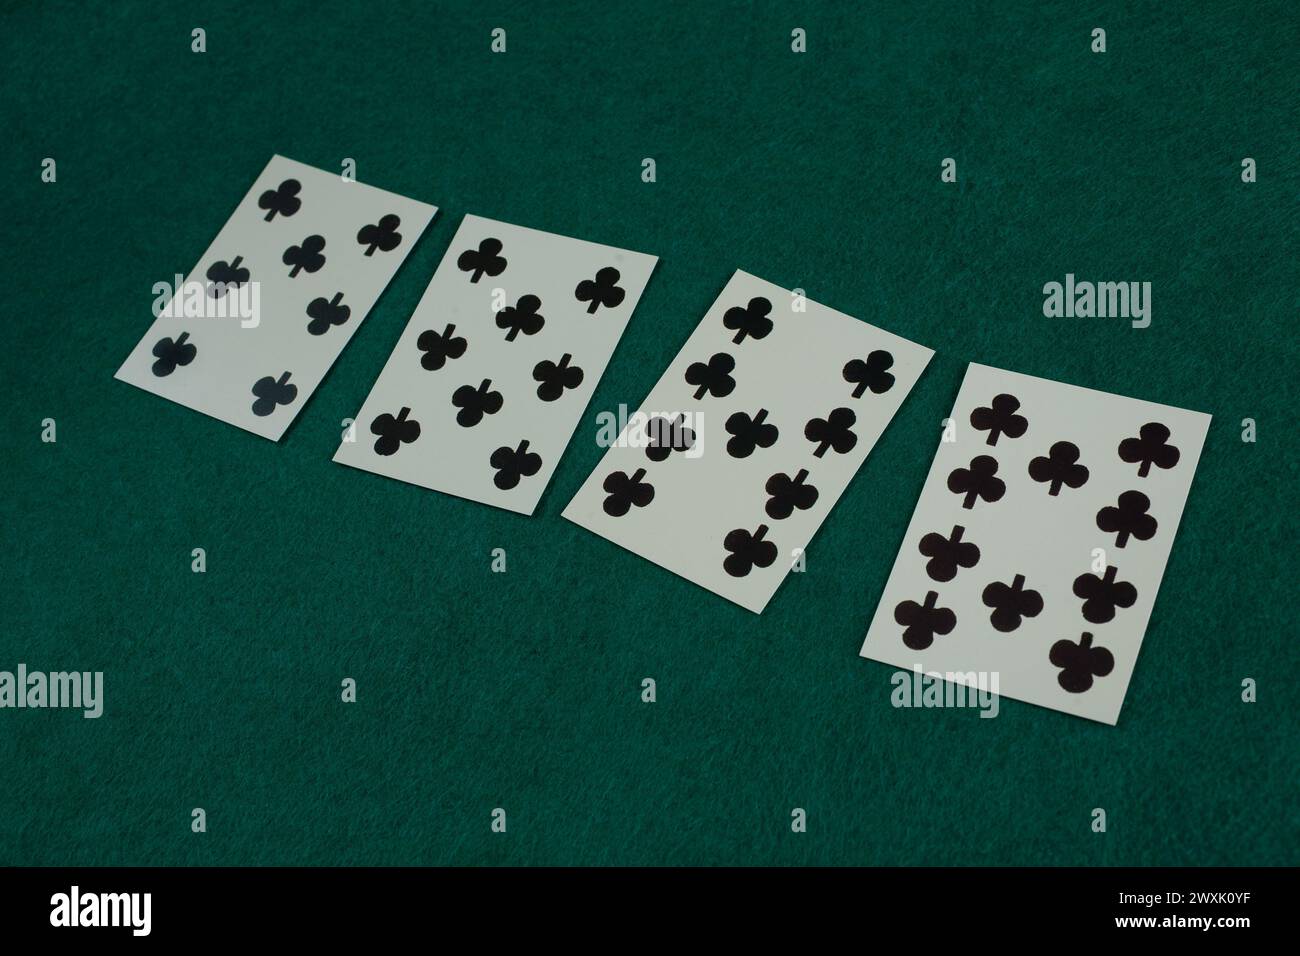 Old west era playing card on green gambling table. 7, 8, 9, 10 of spades. Stock Photo